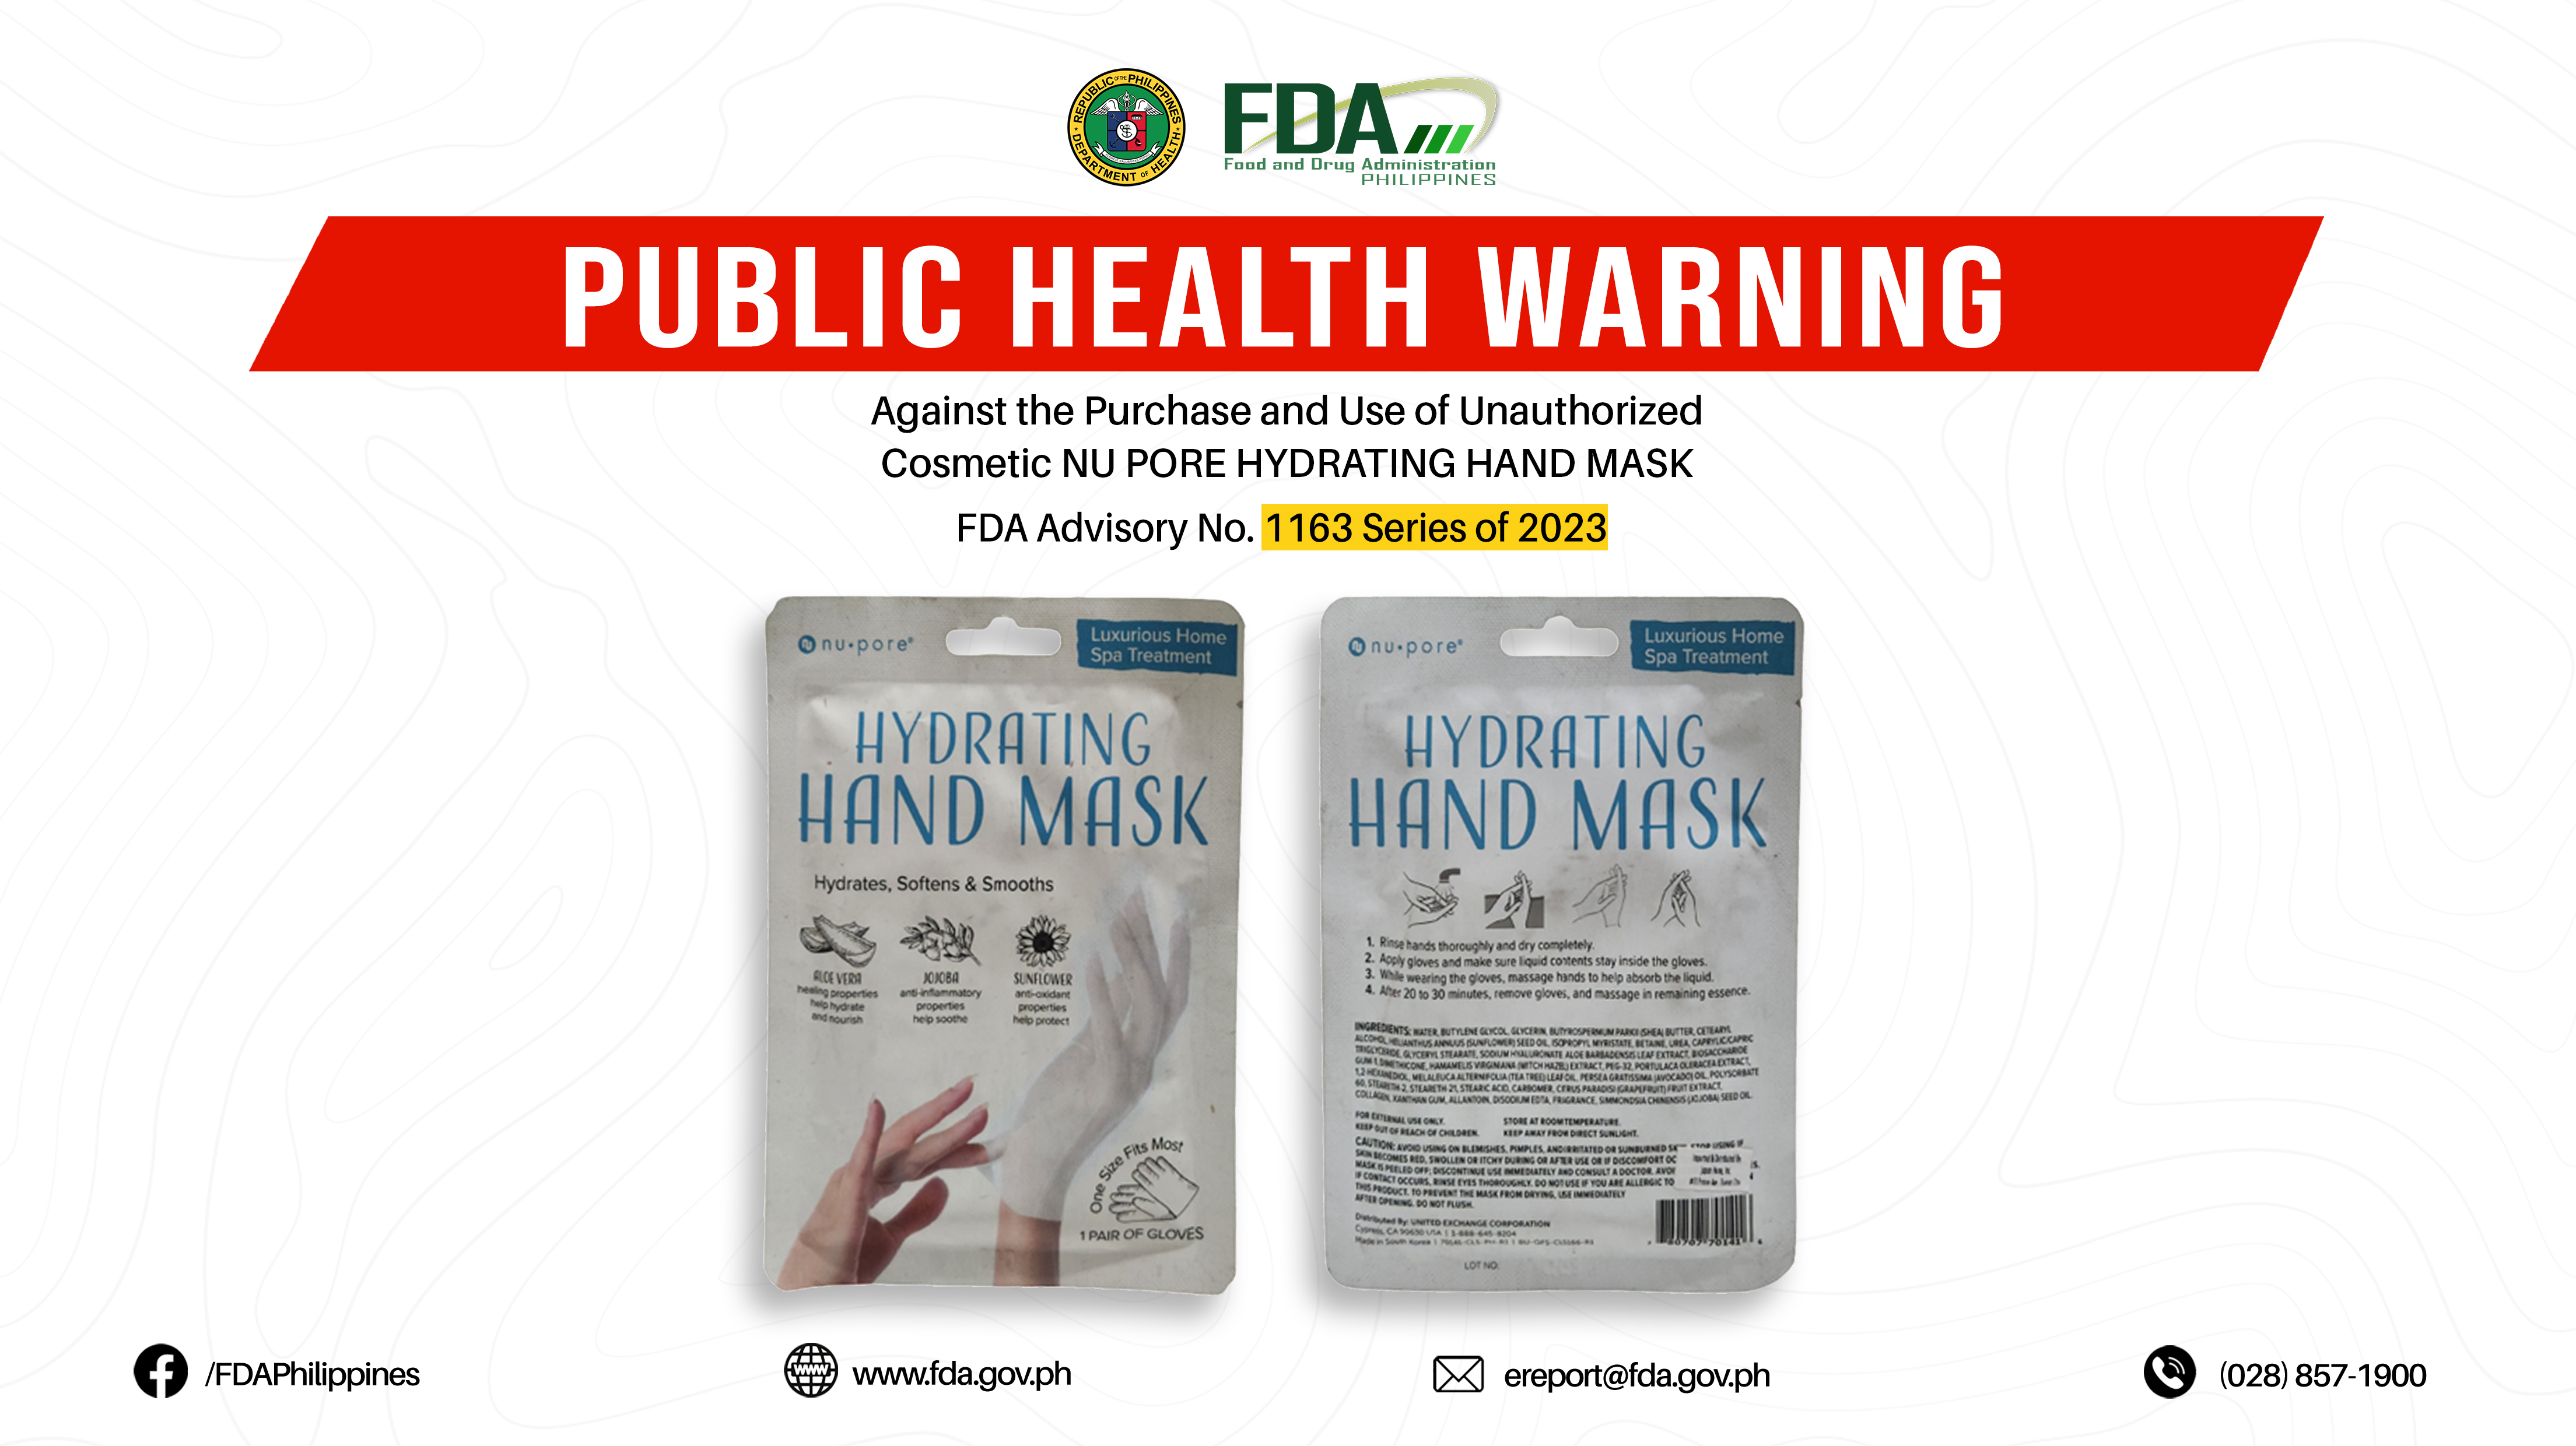 FDA Advisory No.2023-1163 || Public Health Warning Against the Purchase and Use of Unauthorized Cosmetic NU PORE HYDRATING HAND MASK